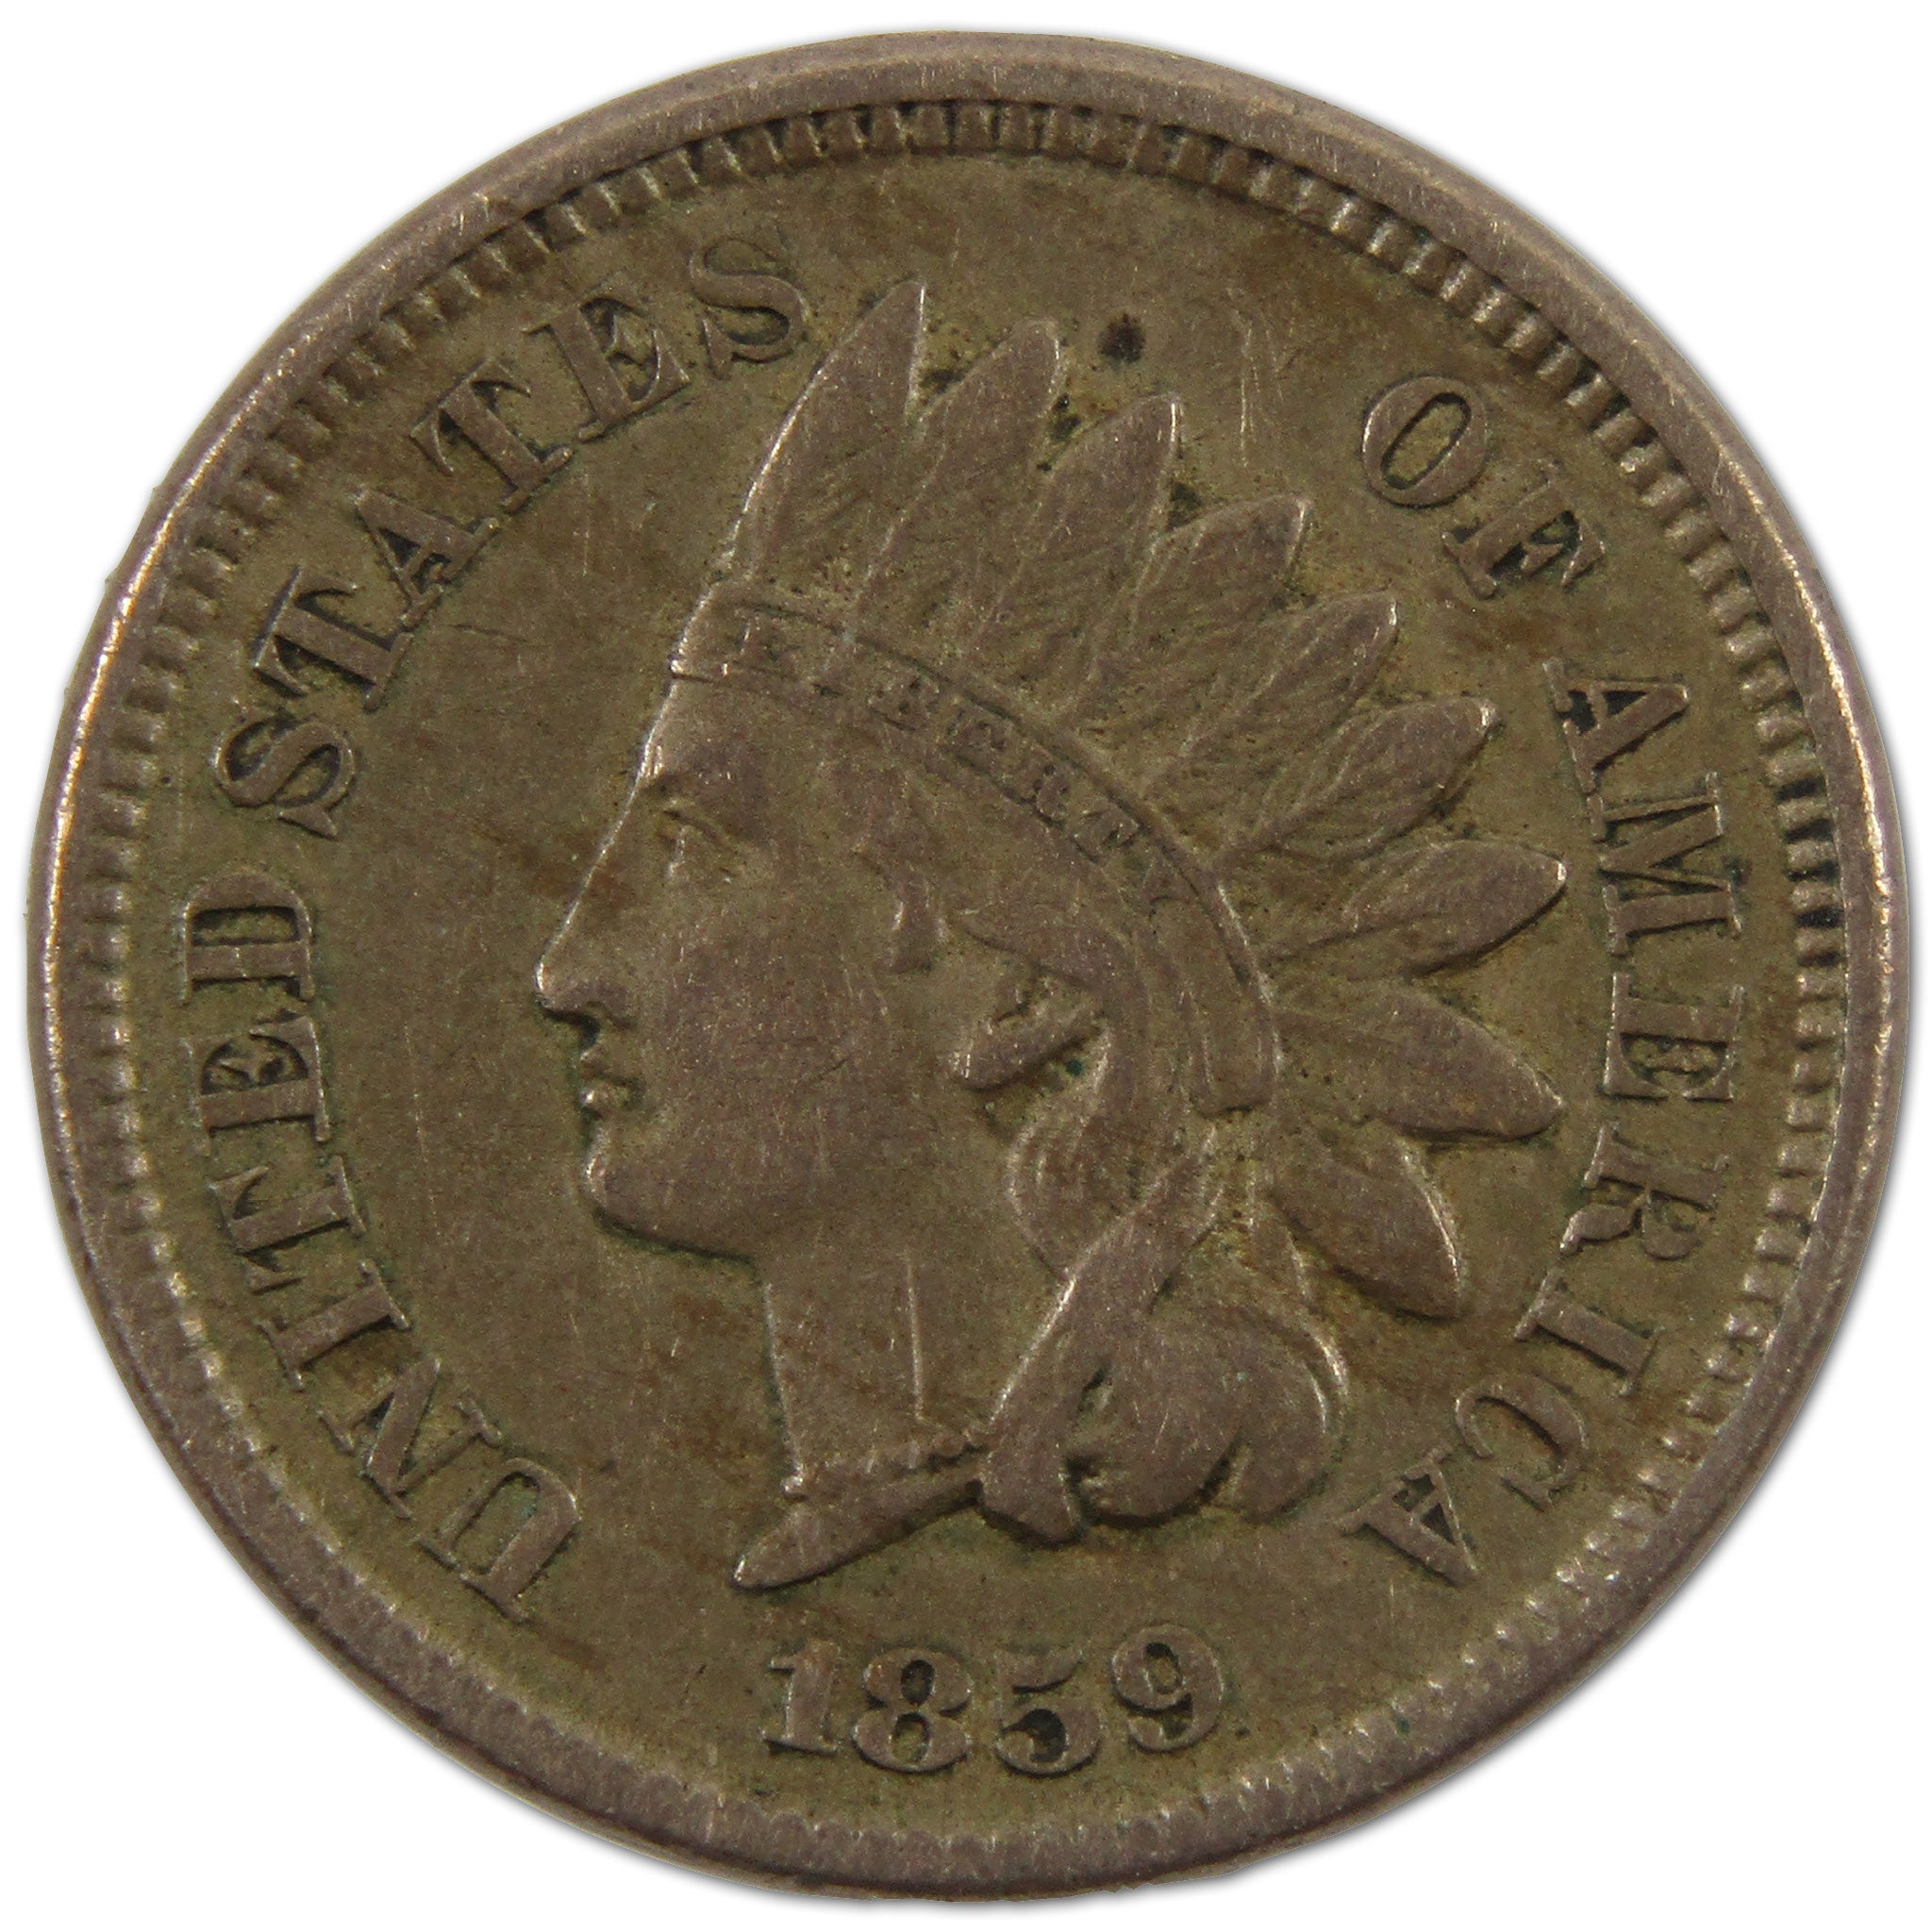 1859 Indian Head Cent XF EF Extremely Fine Copper-Nickel 1c SKU:I10876